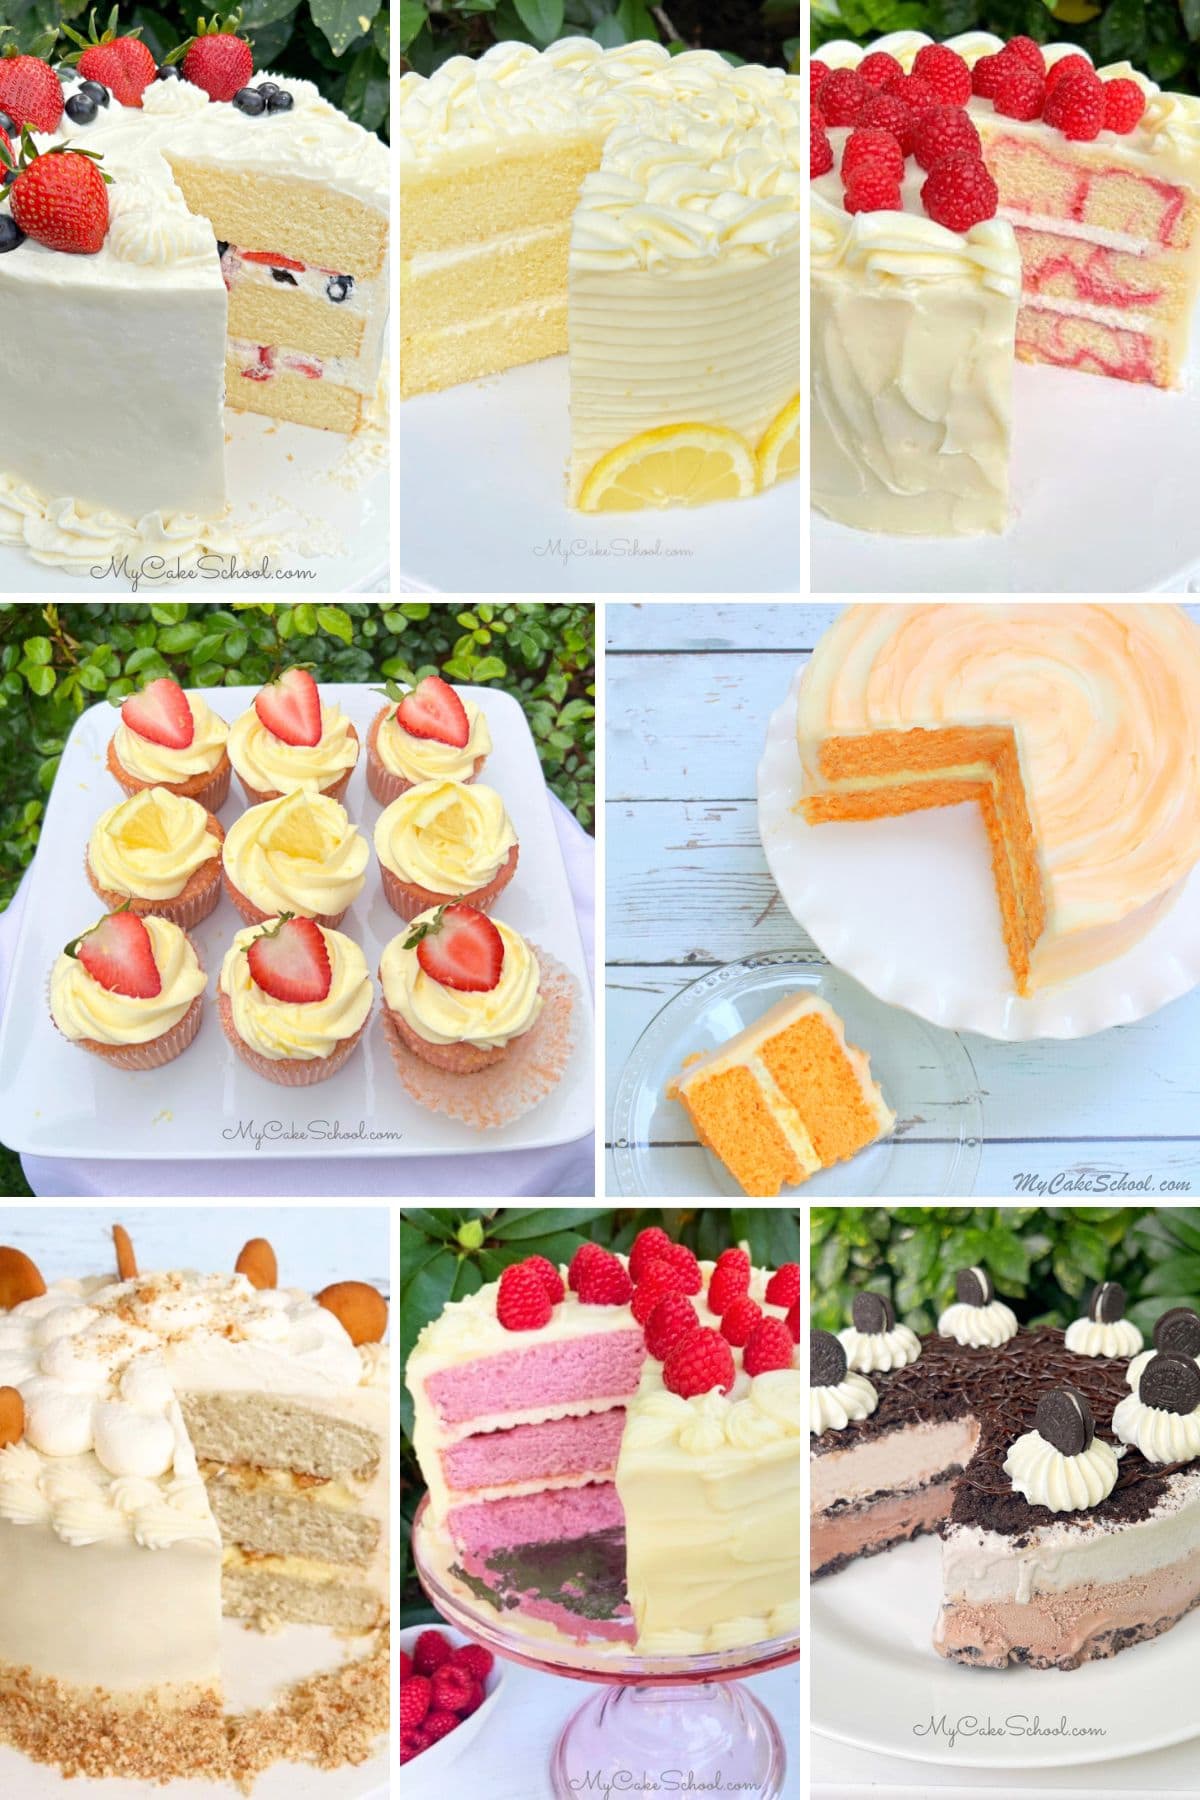 Mother's Day Cake Recipe ideas photo grid.